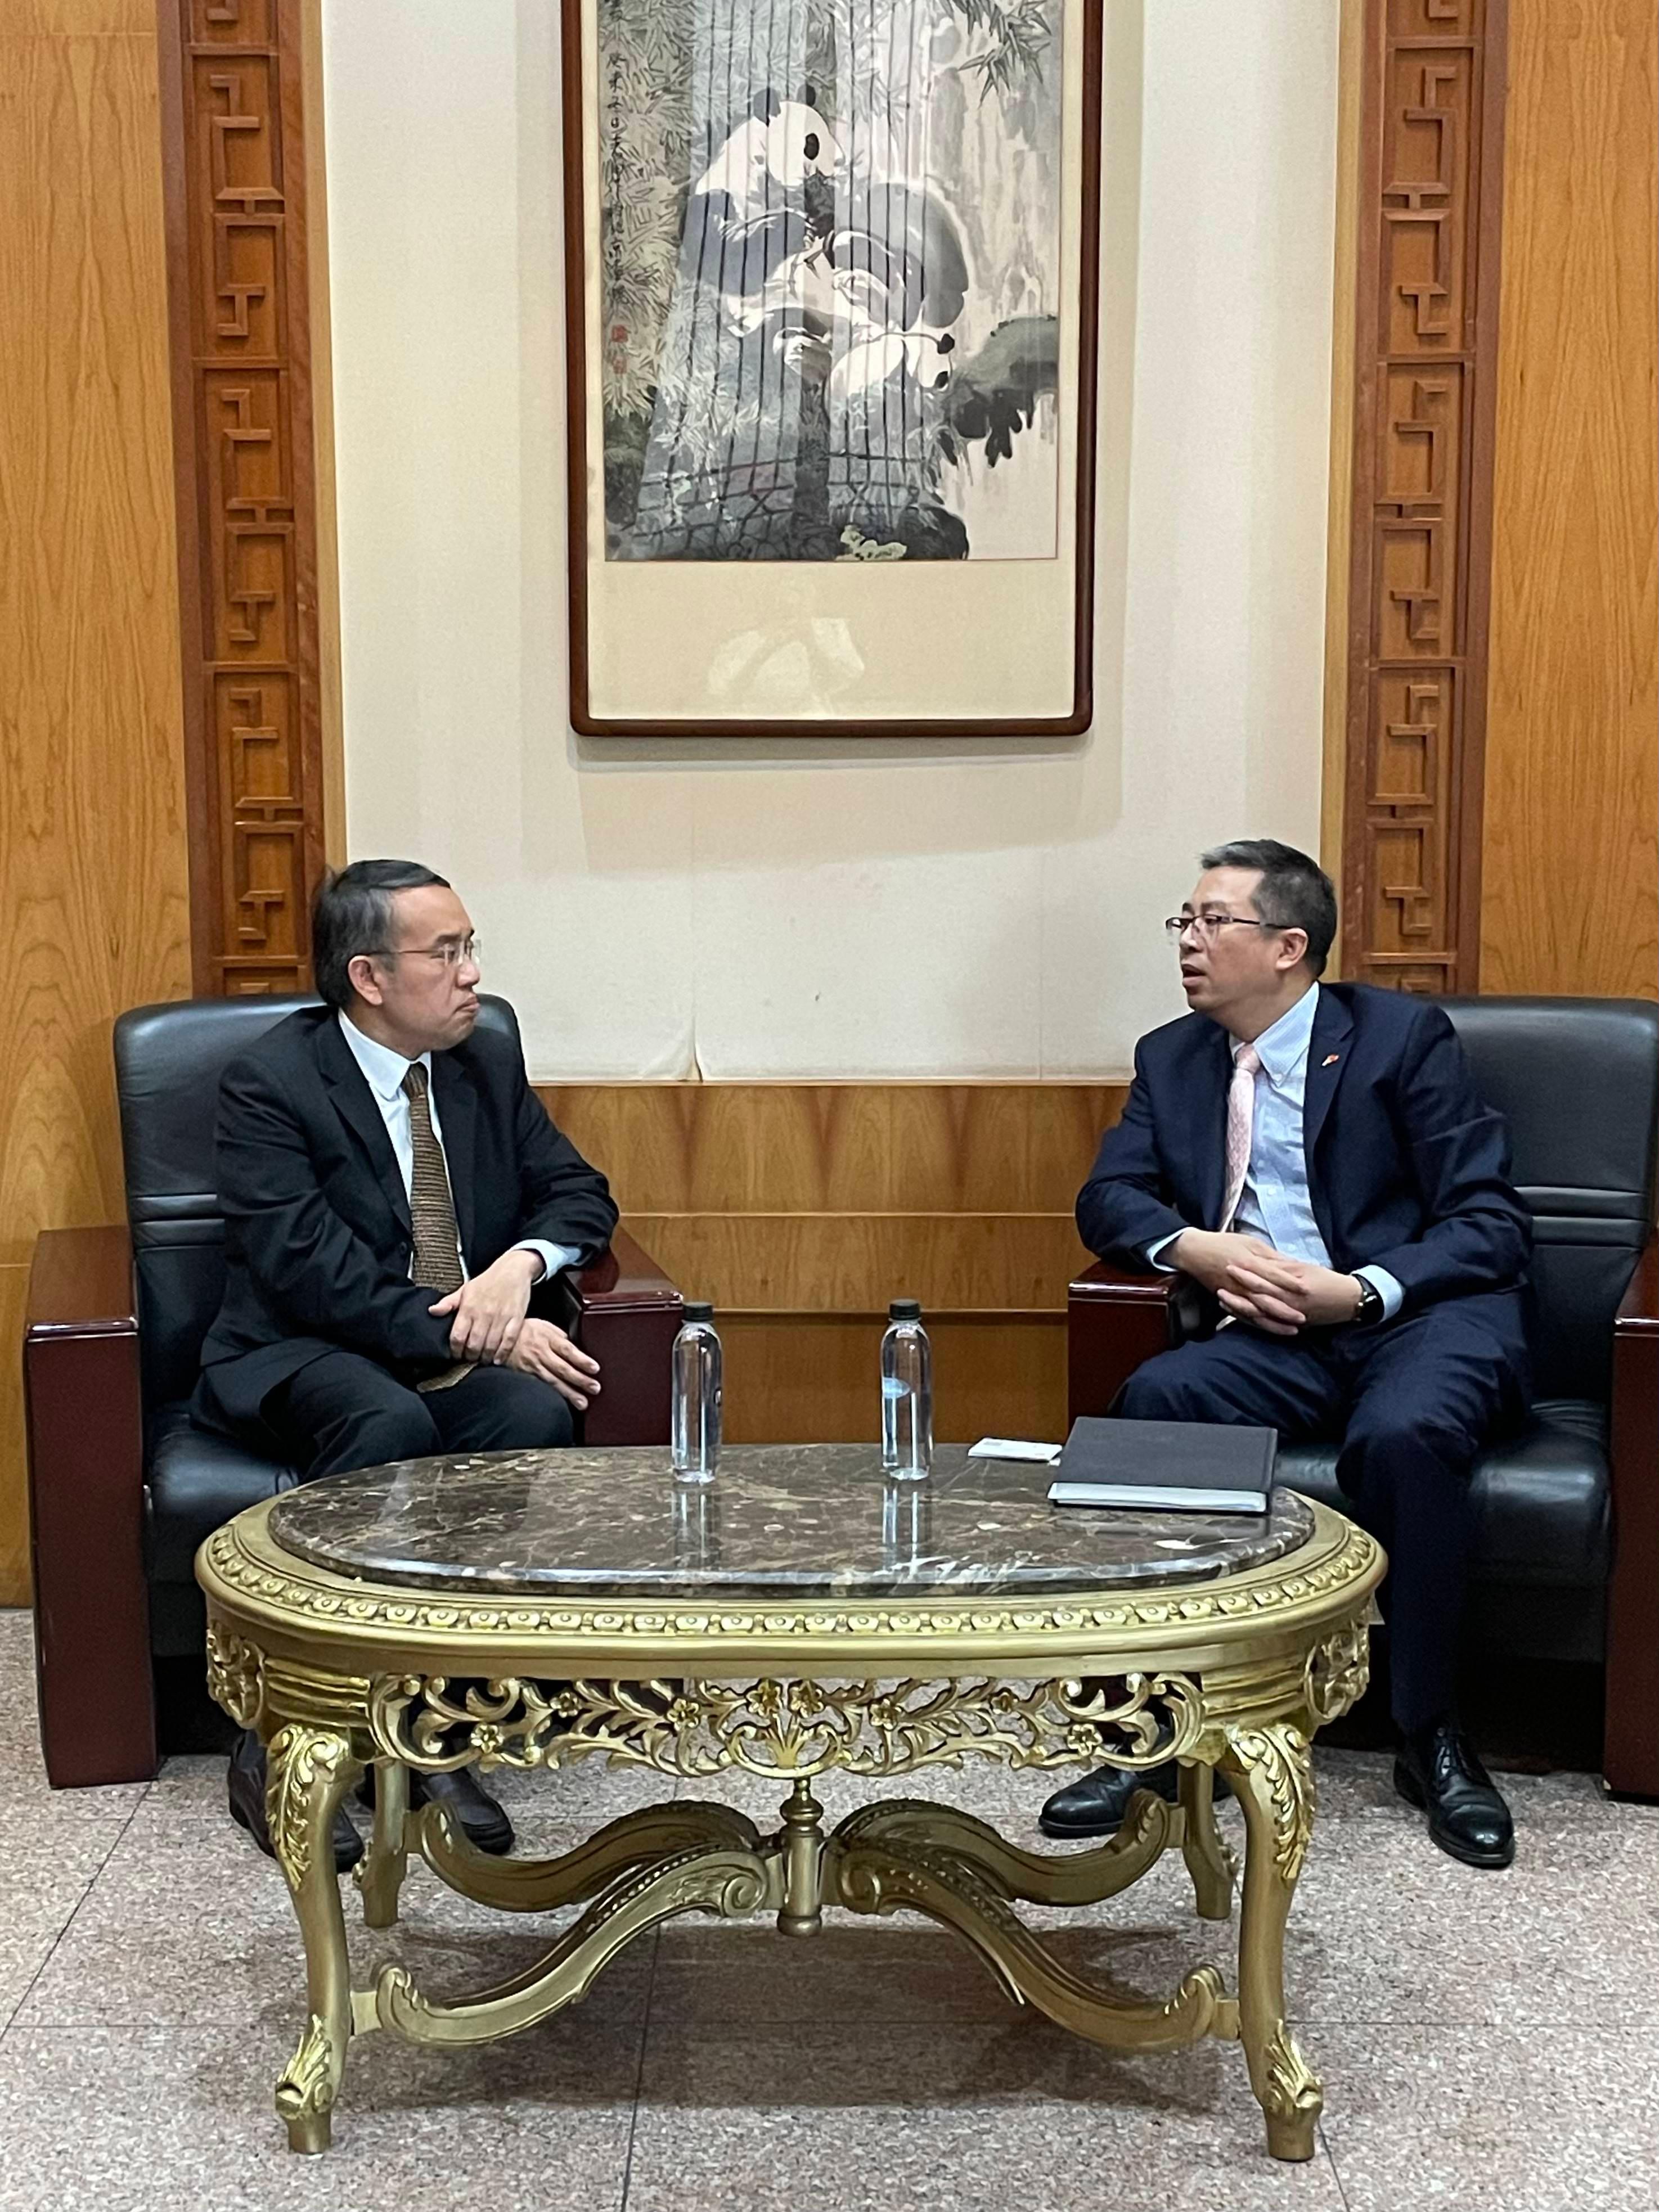 The Secretary for Financial Services and the Treasury, Mr Christopher Hui, continues his visit in Egypt. Photo shows Mr Hui (left) meeting with the Minister of the Chinese Embassy in Egypt, Mr Zhang Chaoyang (right), in Cairo on September 22 (Cairo time).